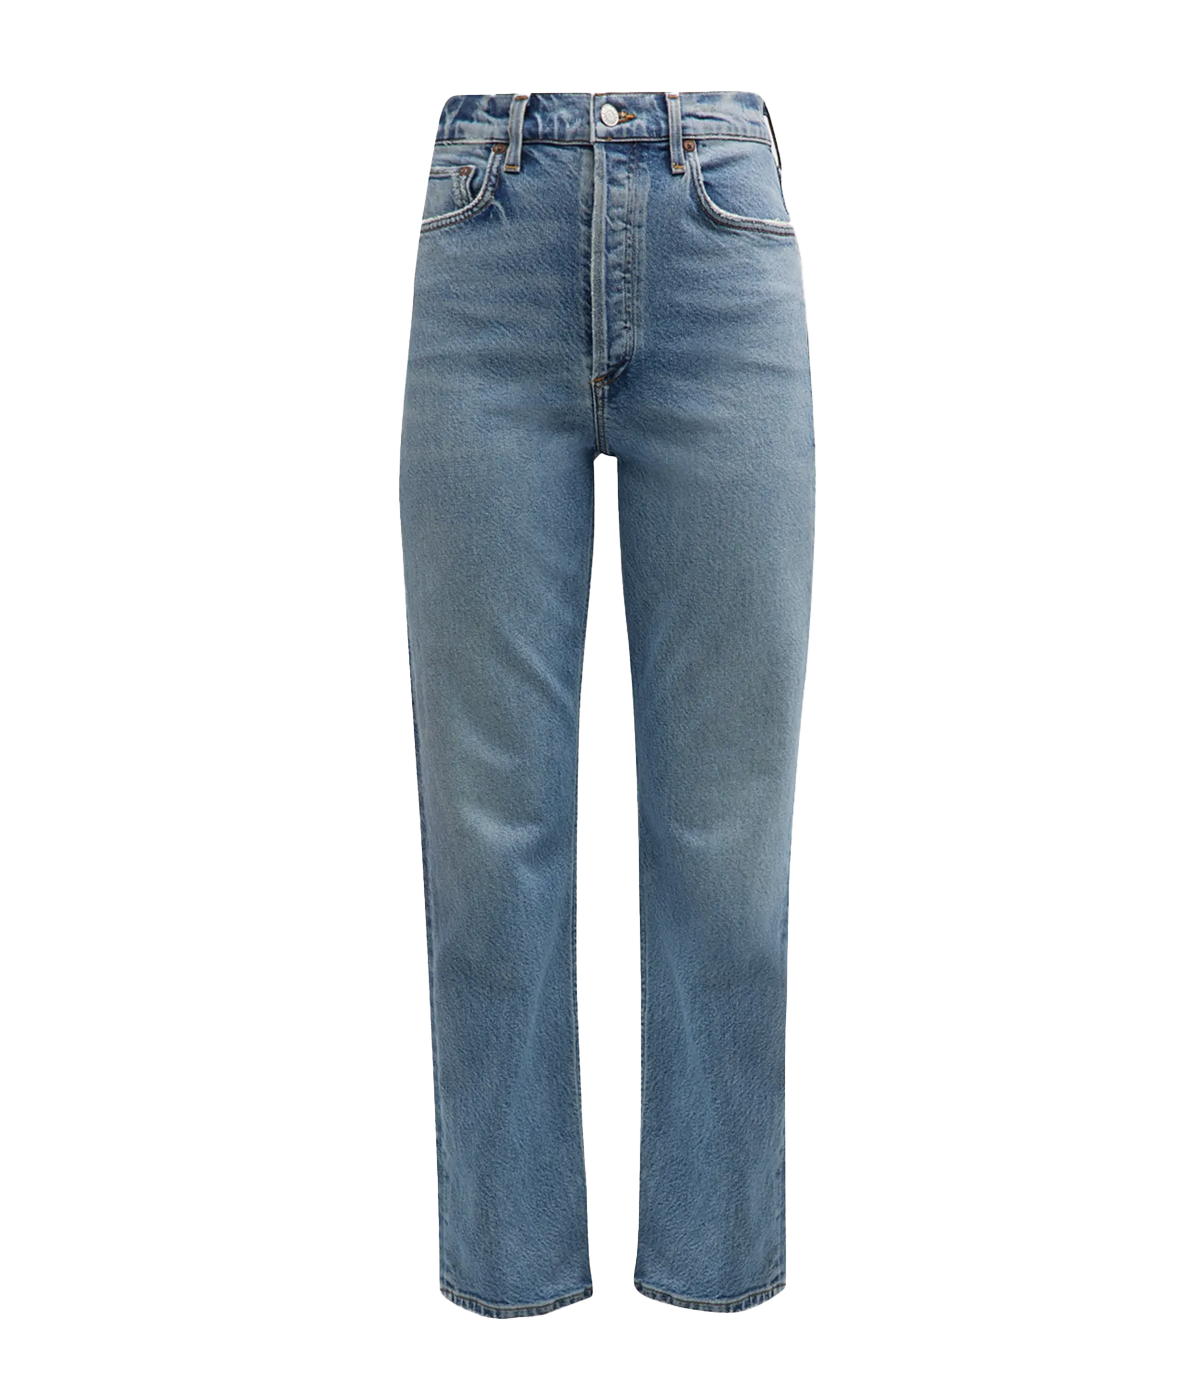 High Rise Stovepipe Jean in Helm